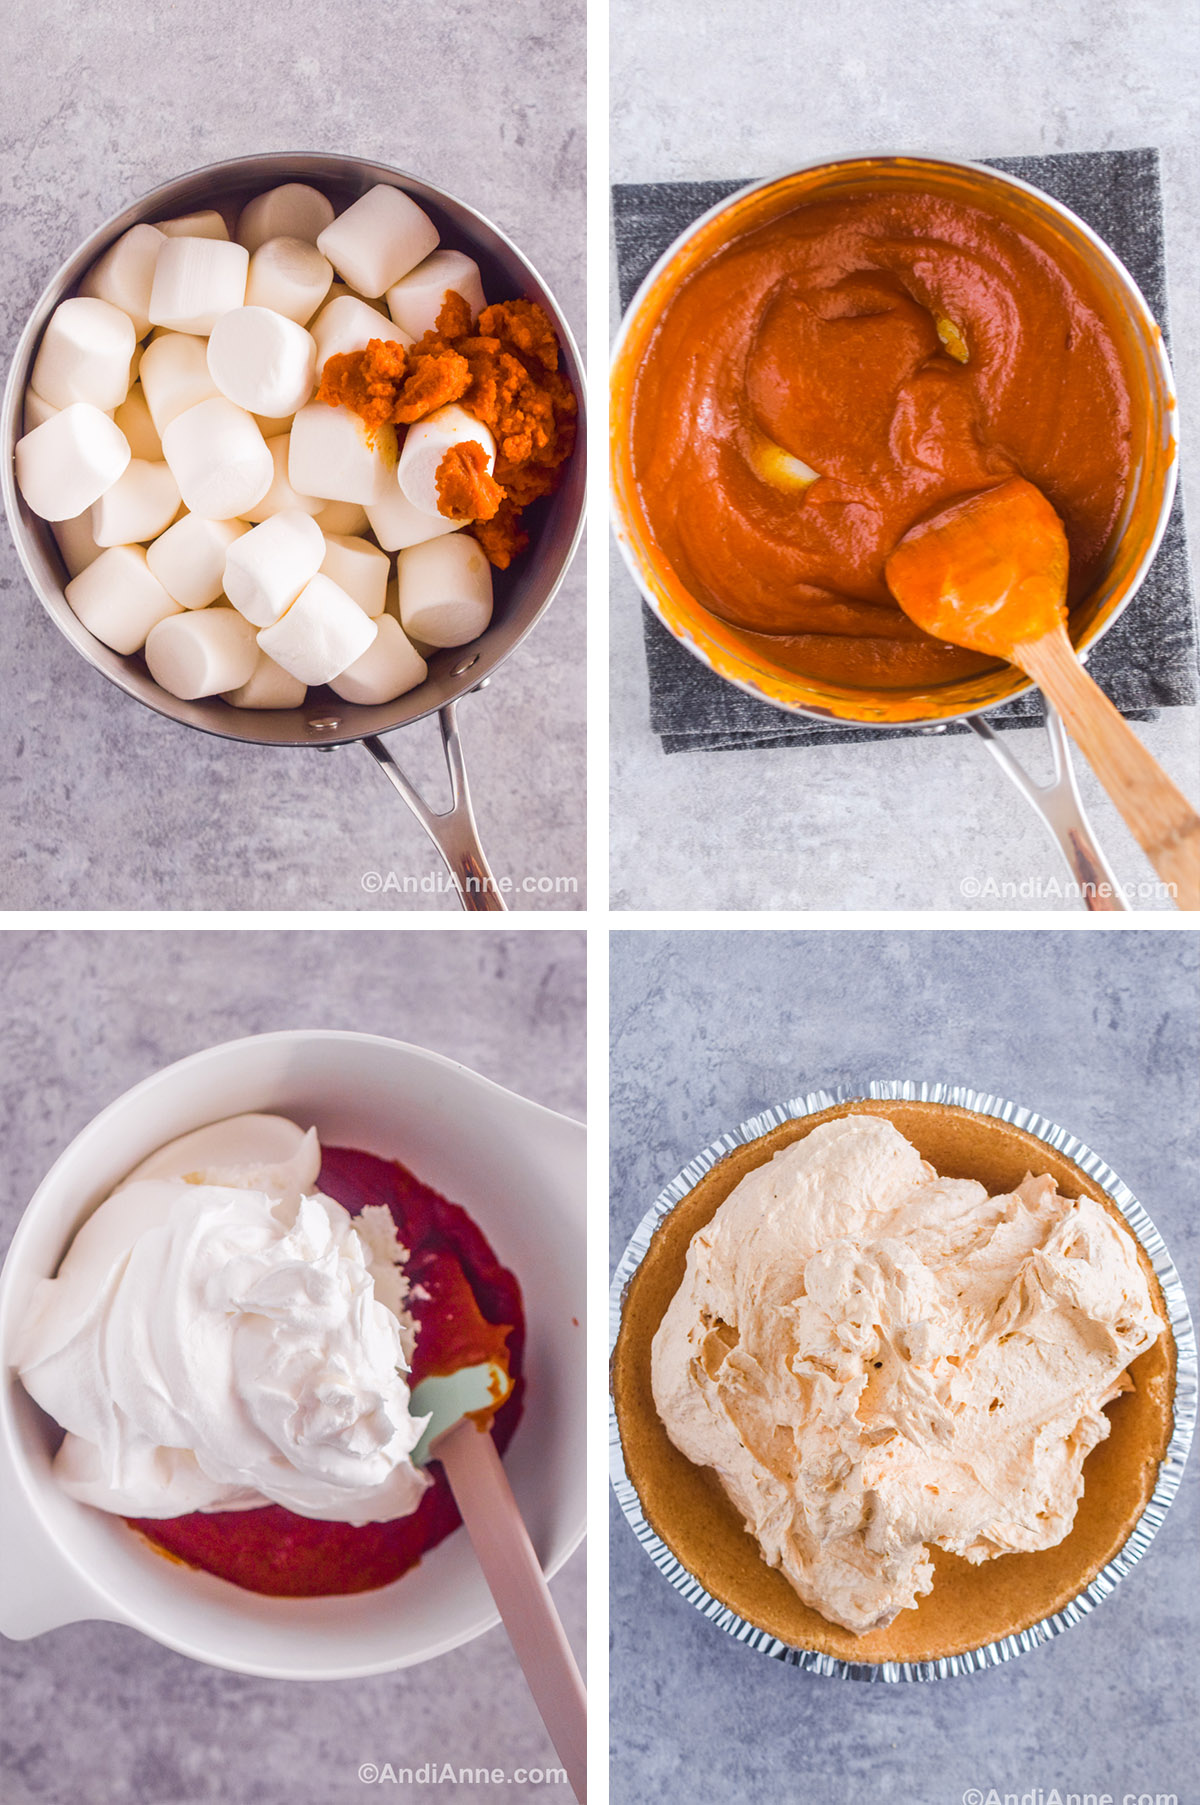 Four images showing steps to make recipe including a pot with marshmallows and pumpkin puree. A pot with melted pumpkin puree and marshmallow mixture and a spoon. A bowl with whipped topping and orange mixture underneath. And a graham cracker crust with whipped orange colored topping dumped on top.